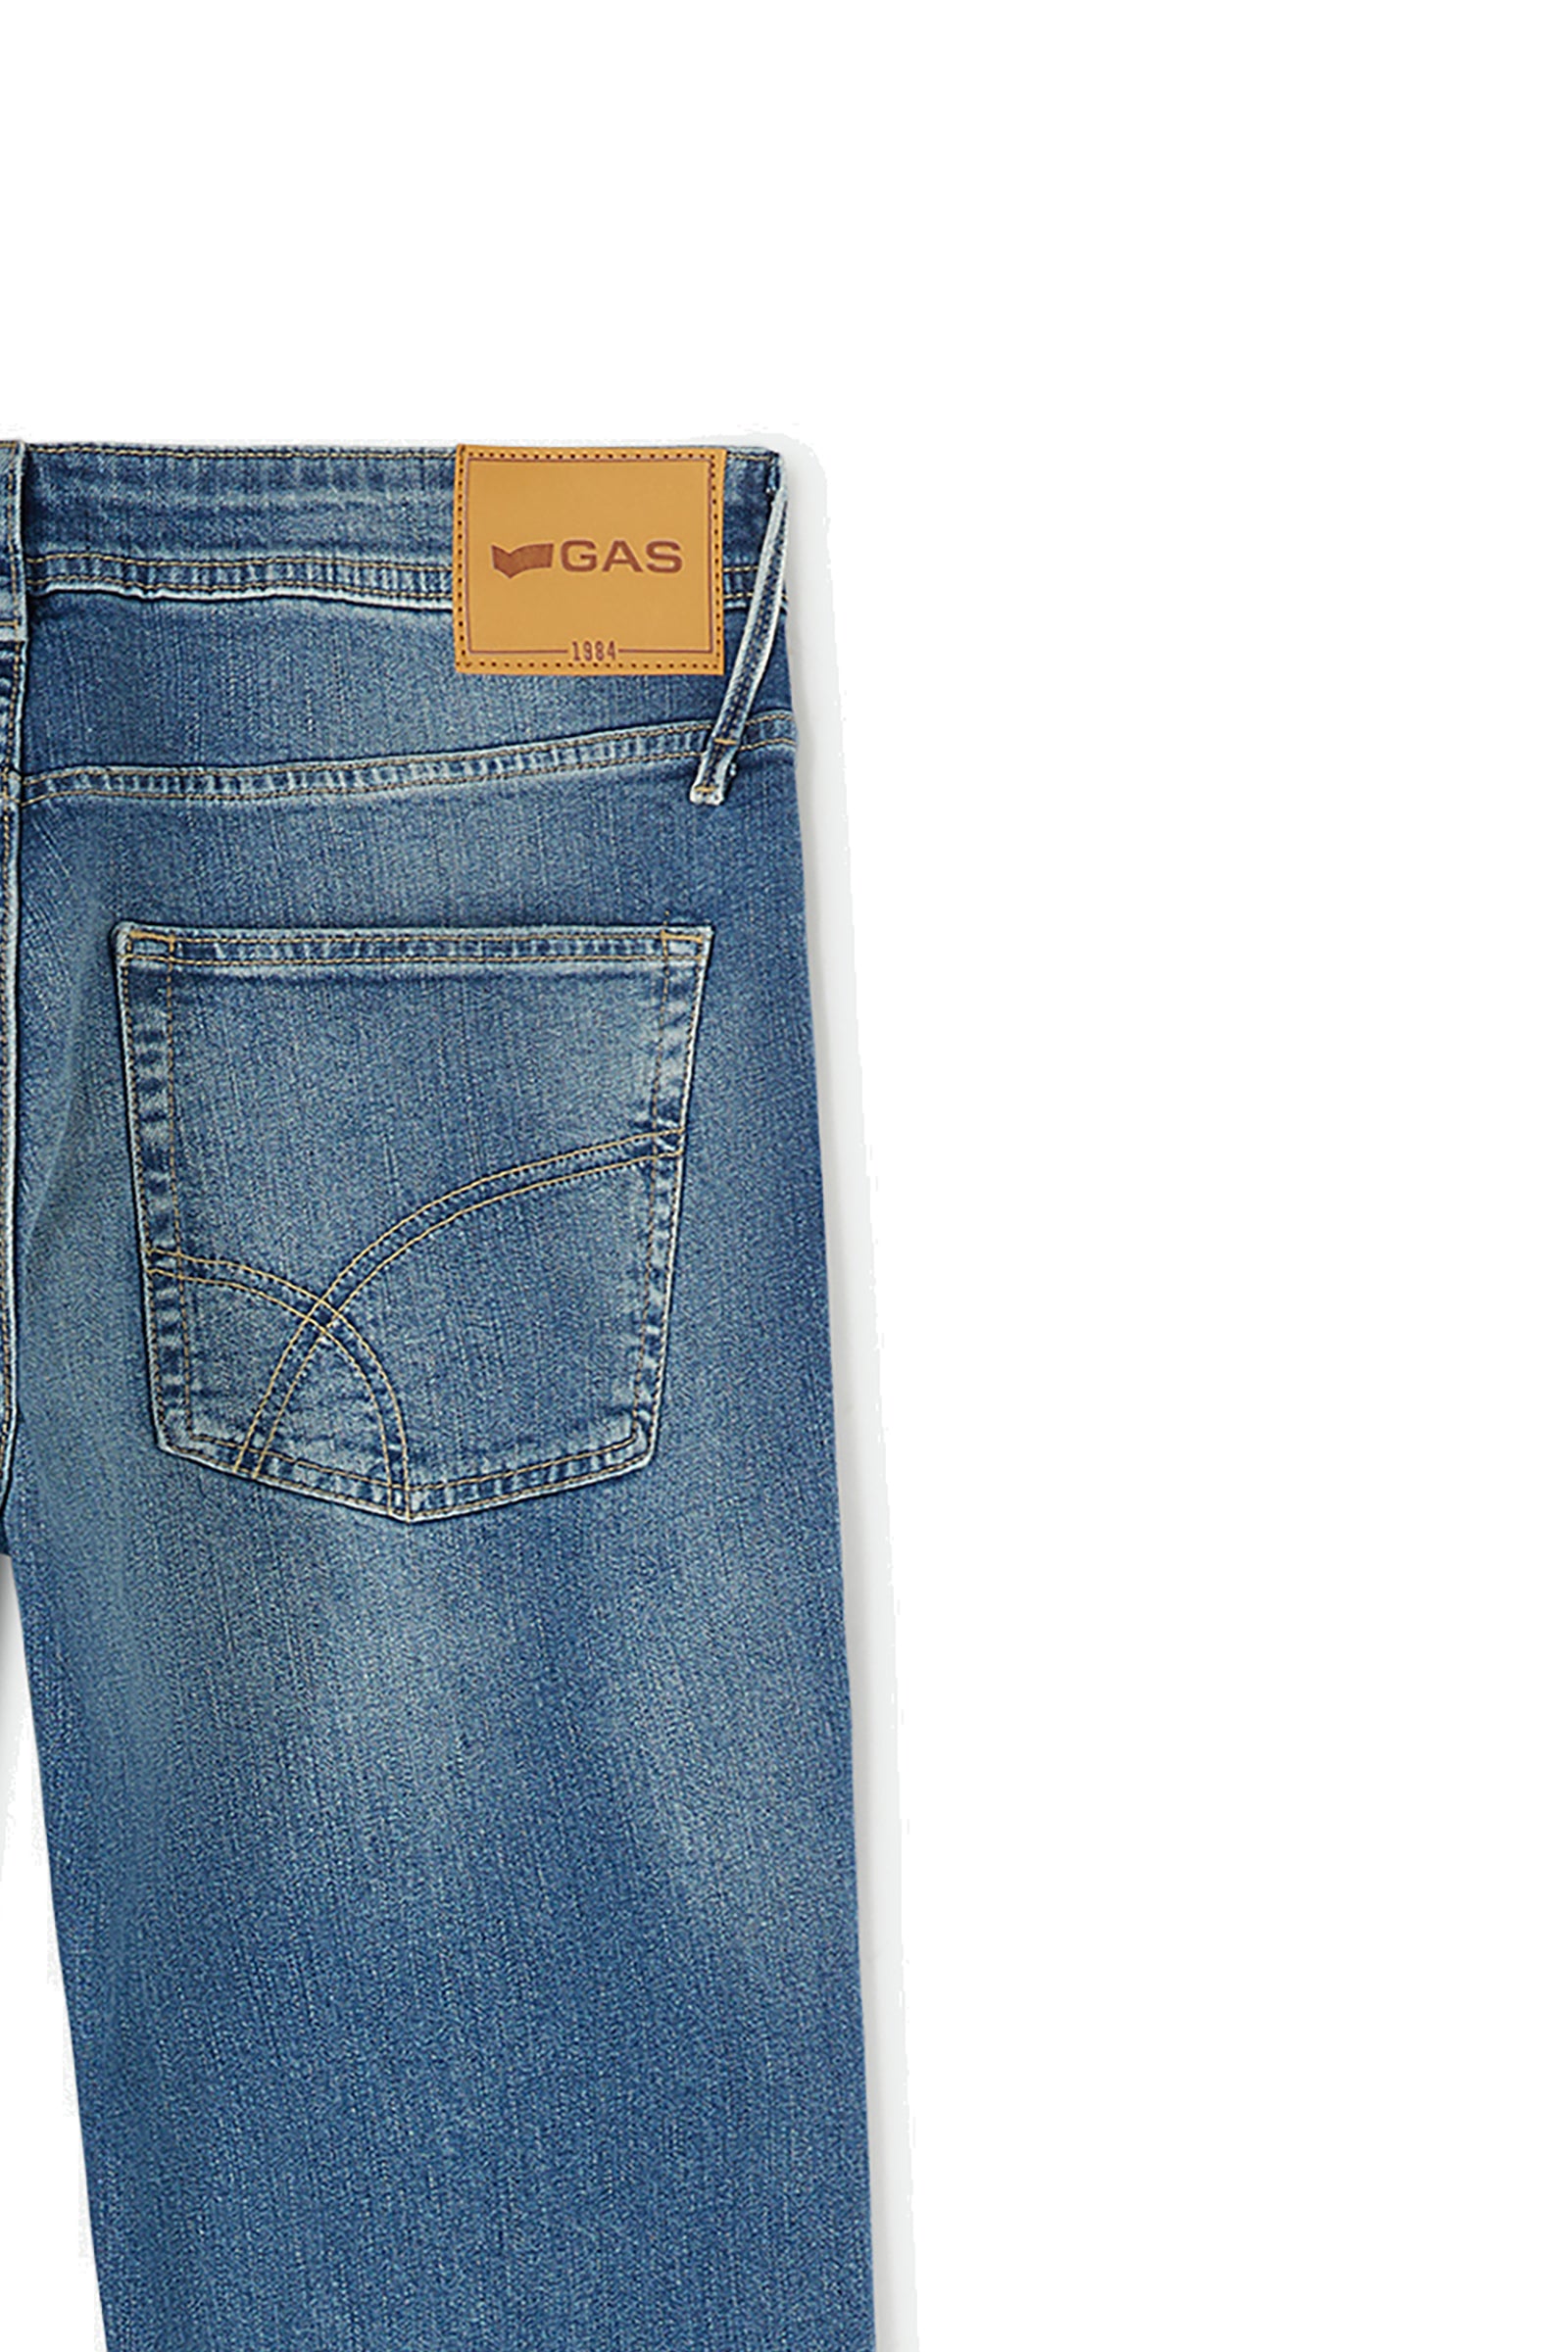 Kevin Carrot 5 Pocket in Stone Mid Light Jeans GAS   